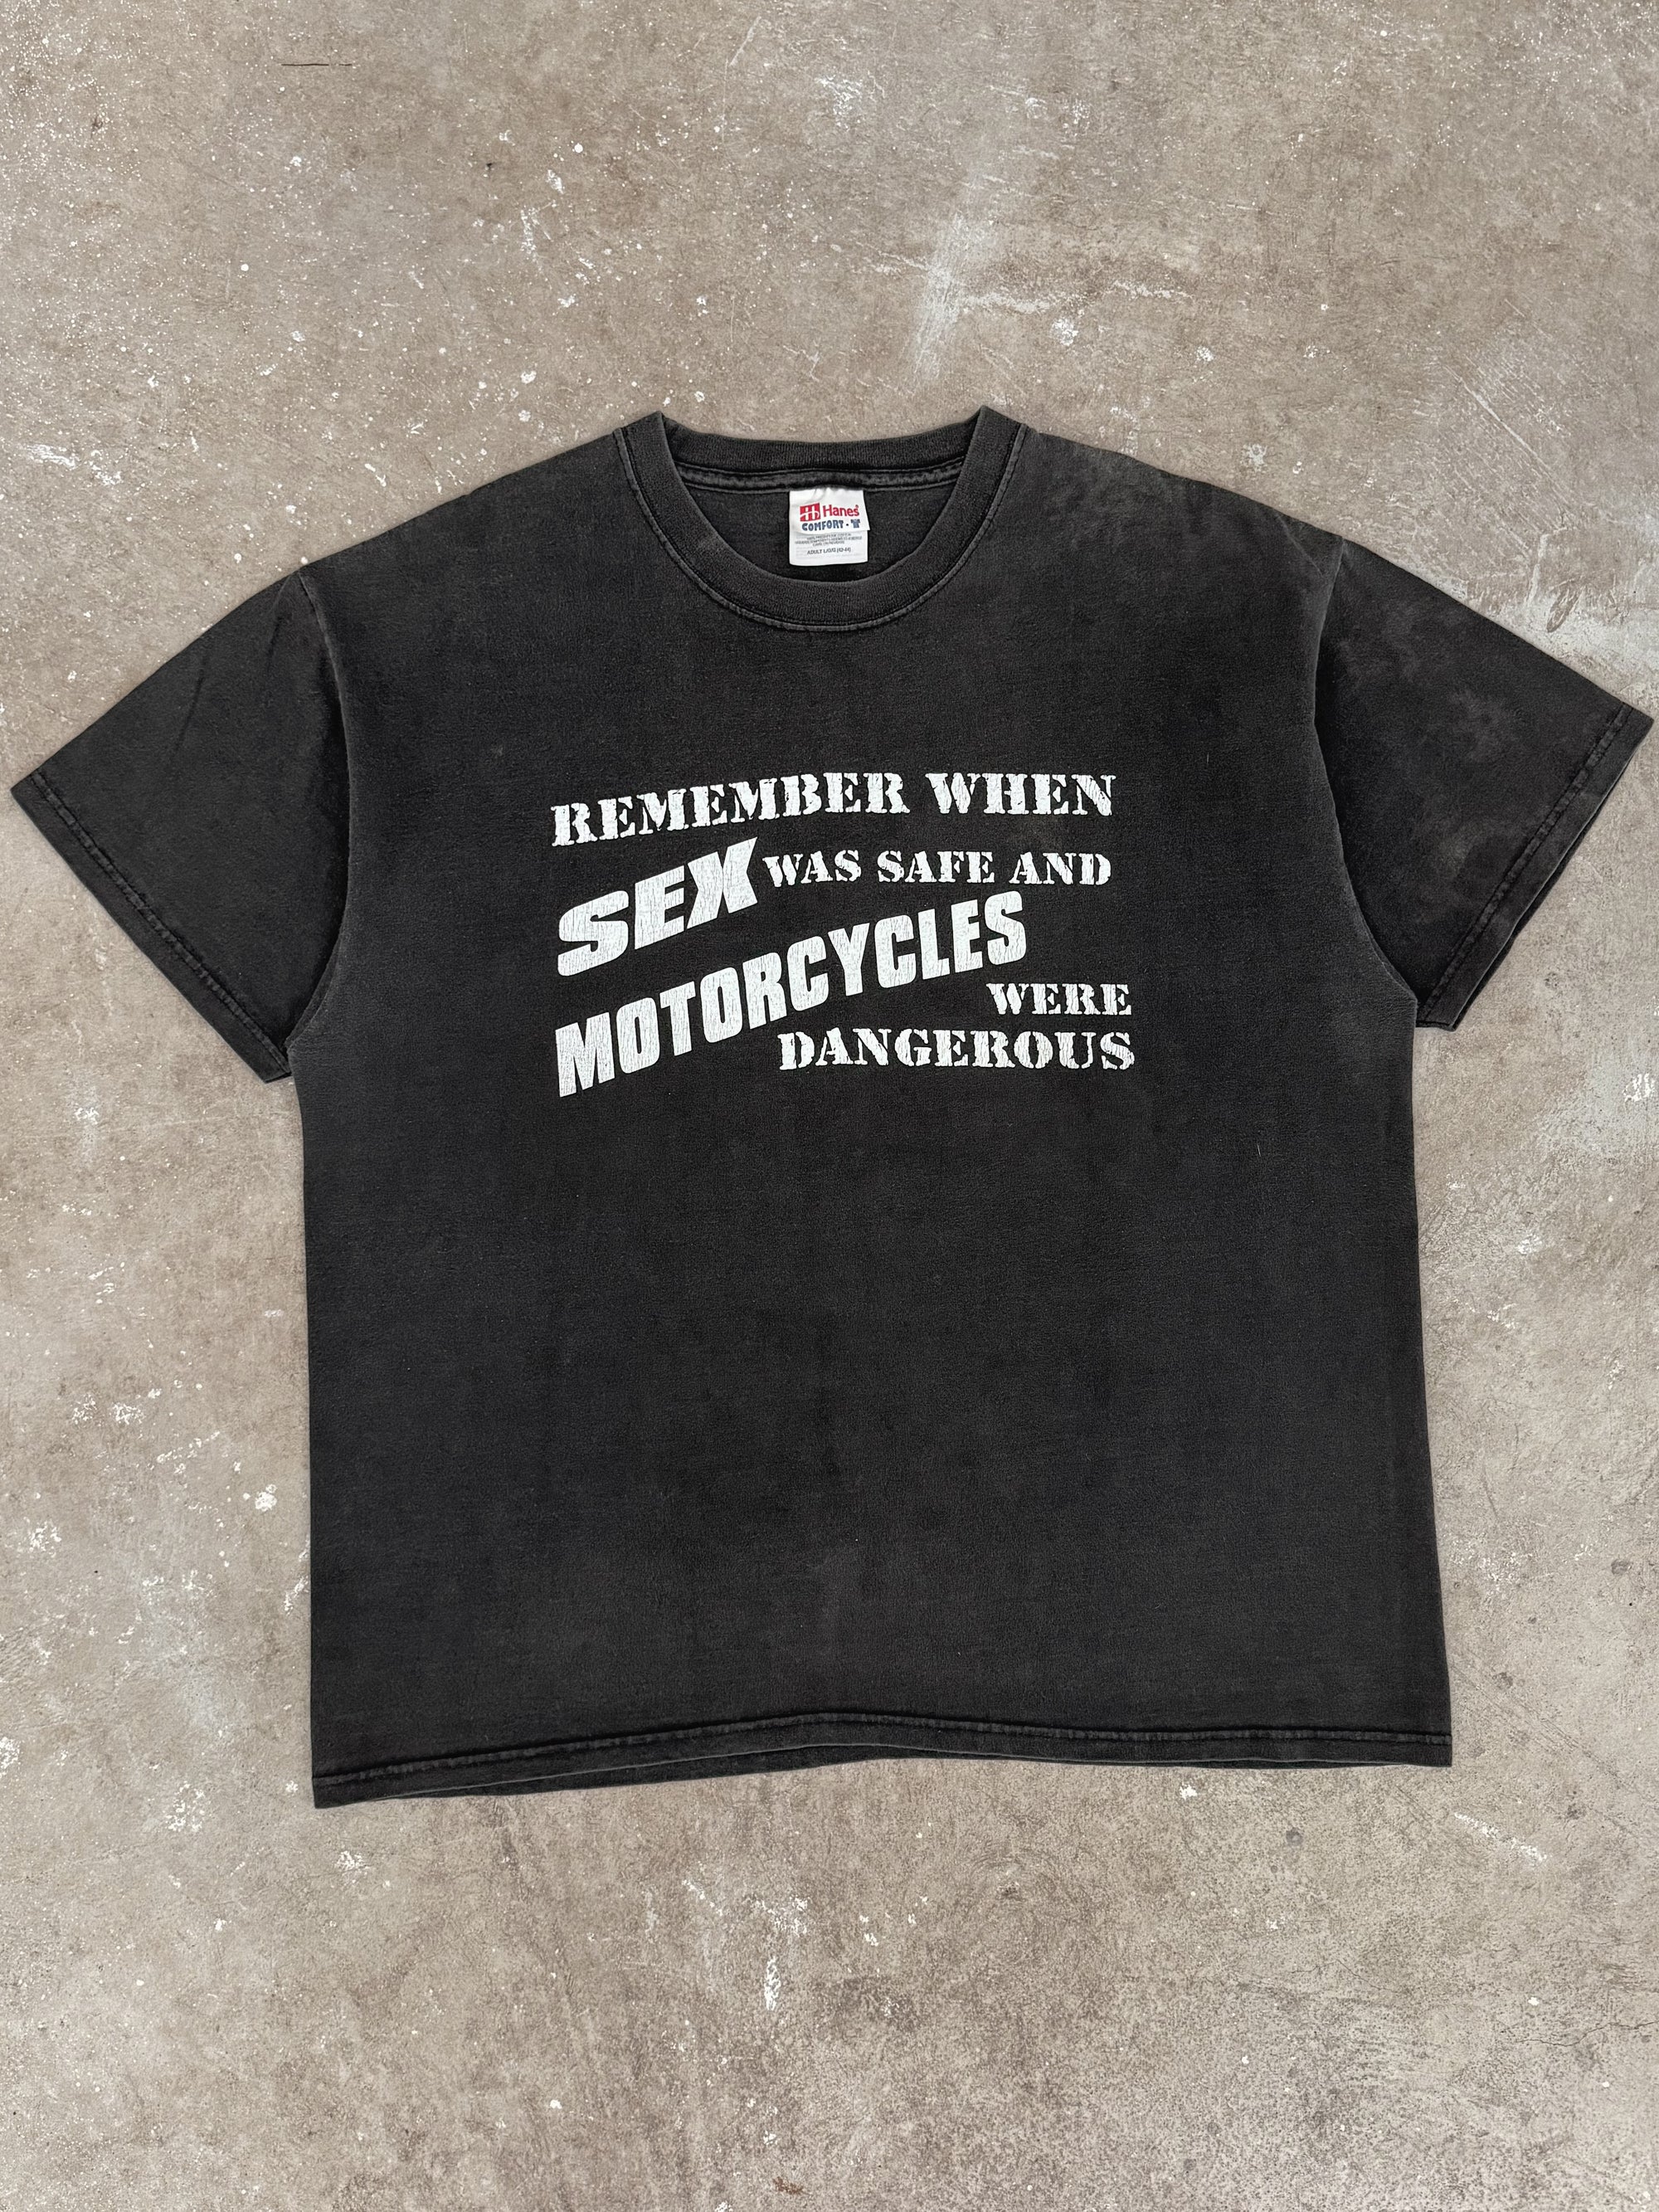 1990s/00s "Remember When Sex Was Safe..." Faded Tee (L)